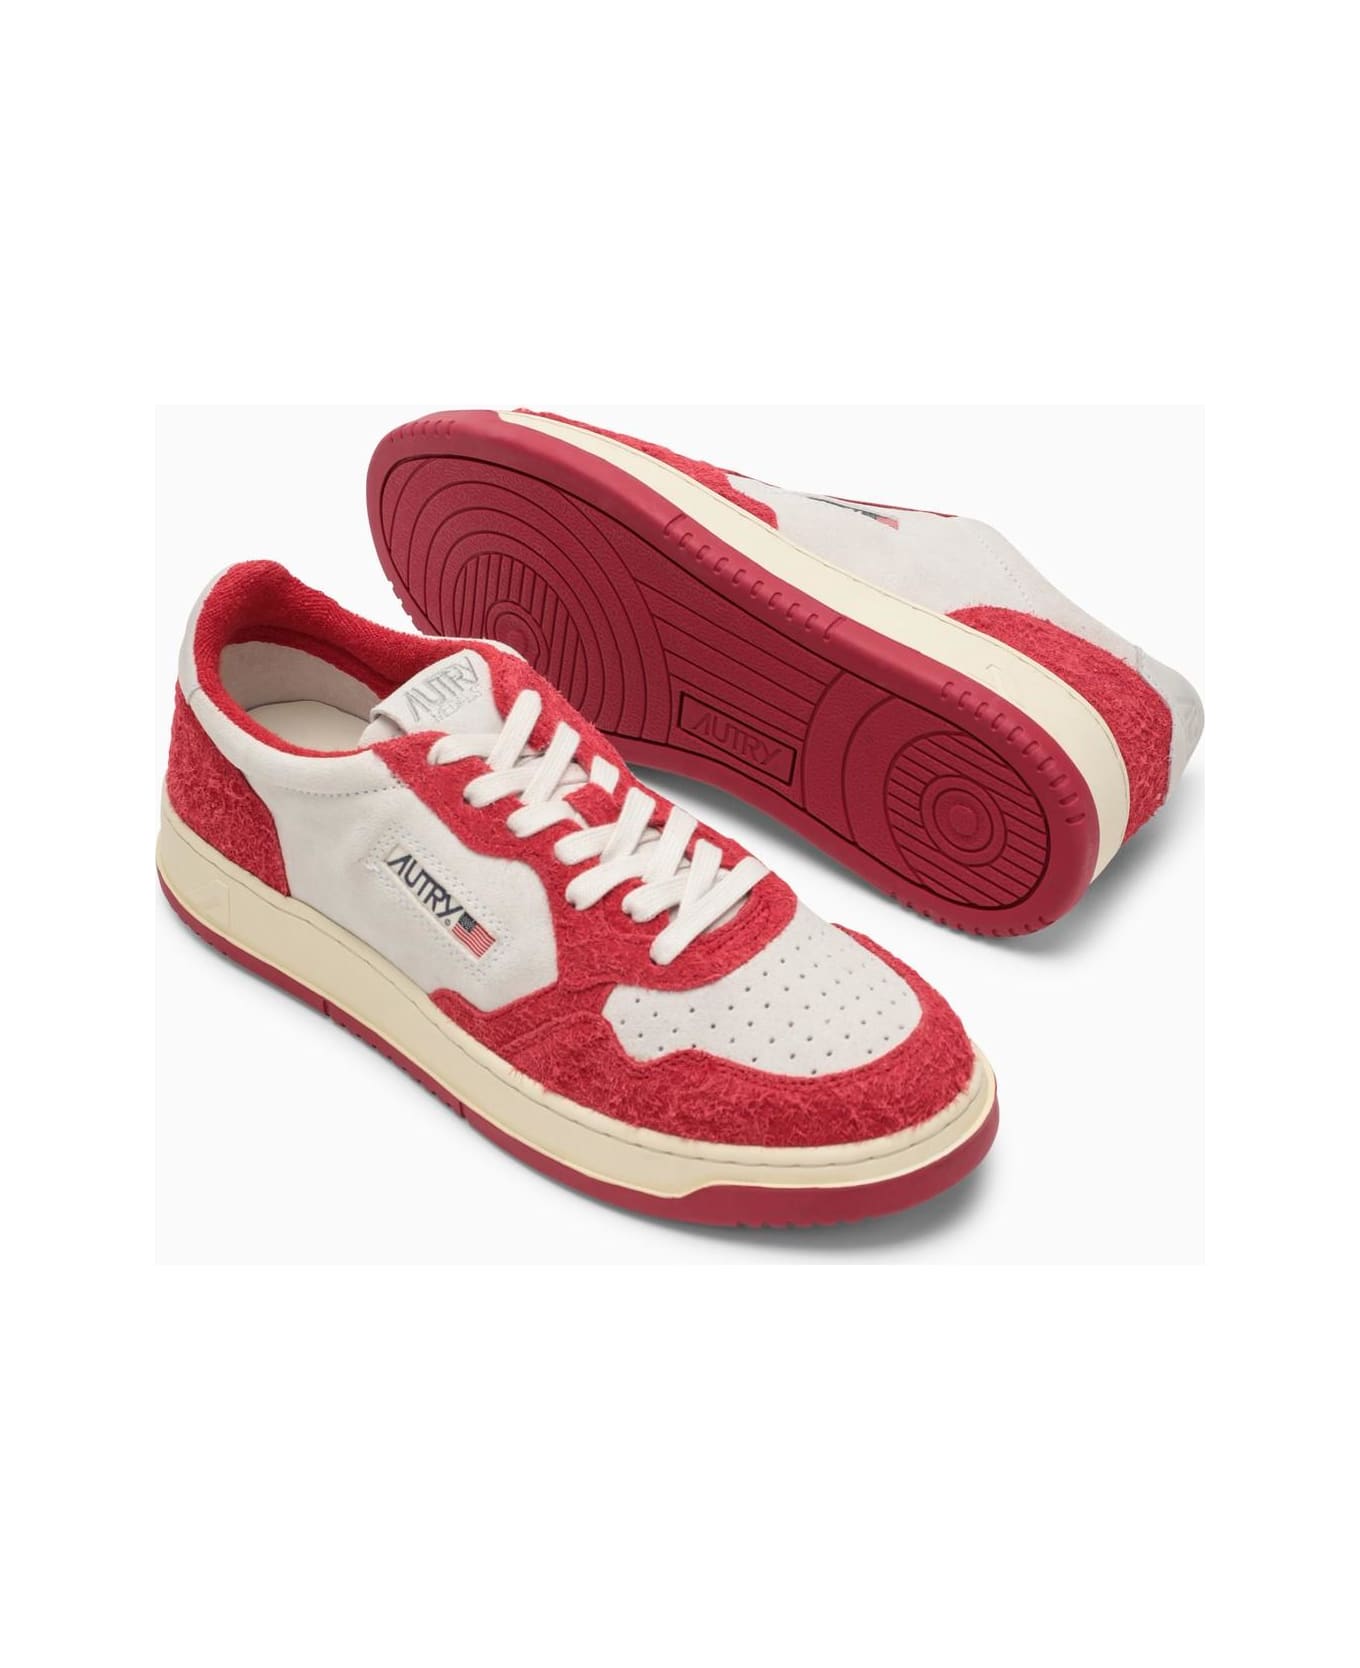 Autry Medalist Suede Trainer - Red